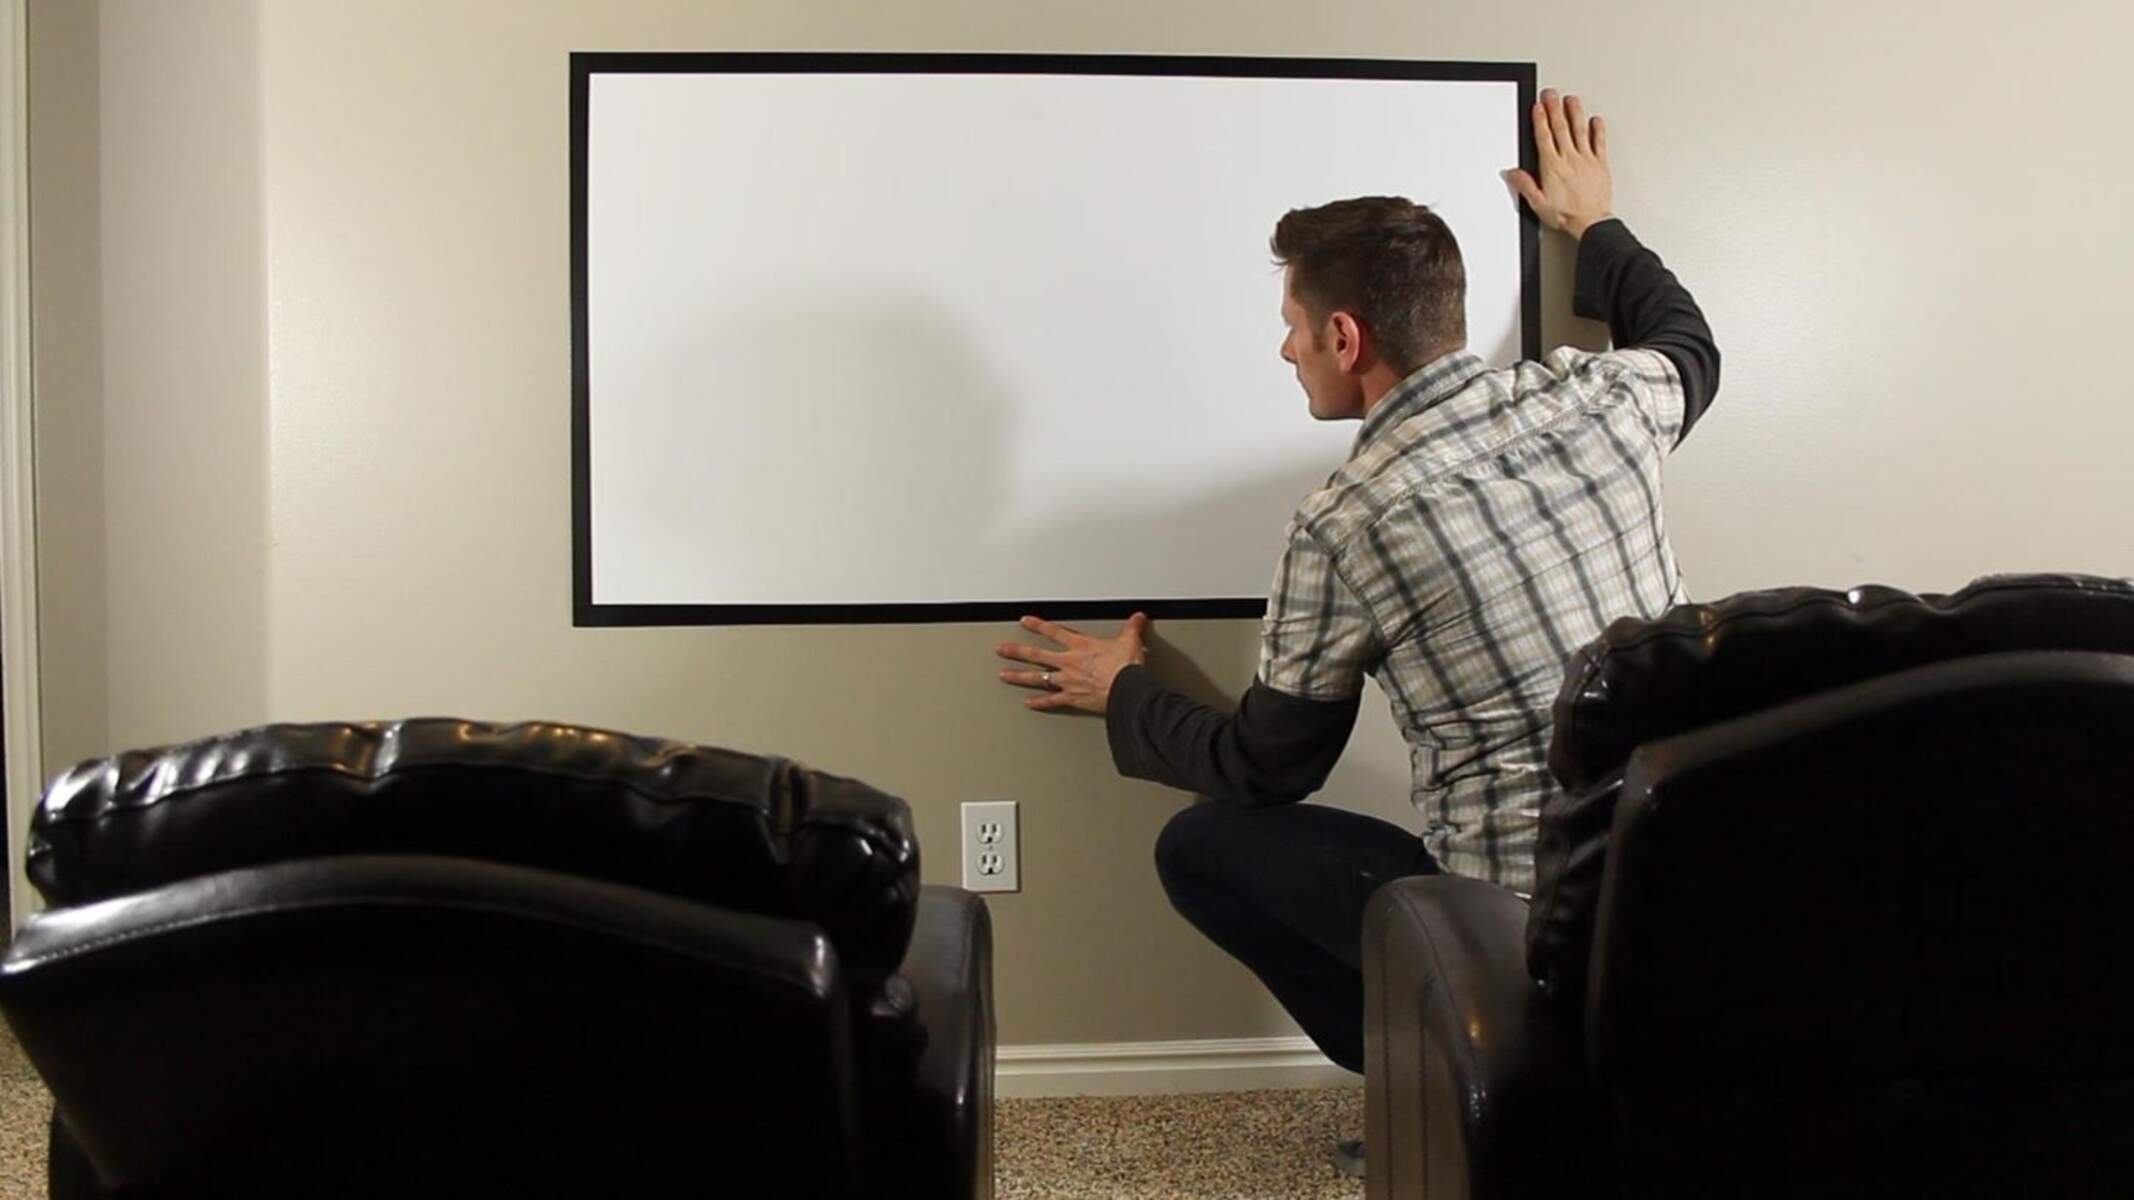 How To Make Projector Screen At Home